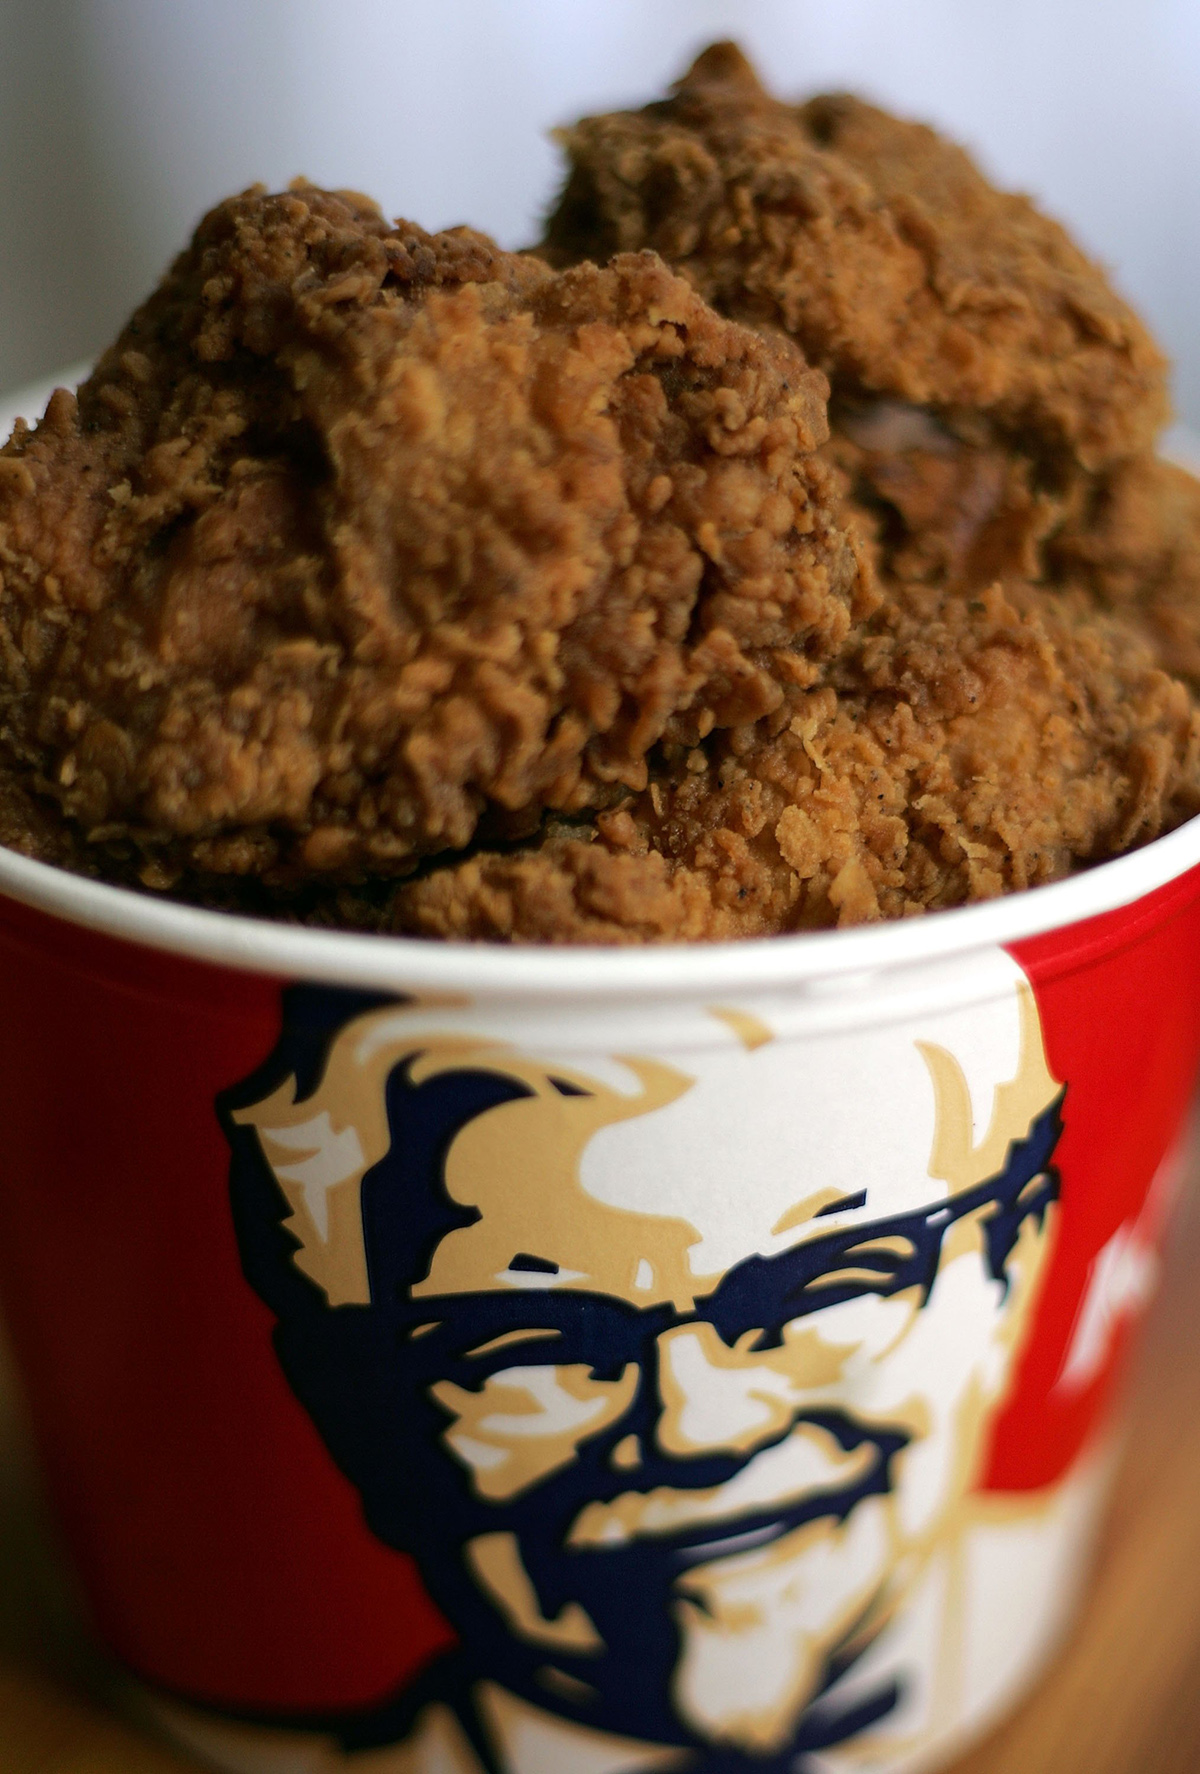 SAN RAFAEL, CA - OCTOBER 30: A bucket of KFC Extra Crispy fried chicken is displayed October 30, 2006 in San Rafael, California. KFC is phasing out trans fats and plans to use zero trans fat soybean oil for cooking of their Original Recipe and Extra Crispy fried chicken as well as other menu items. KFC expects to have all of its 5,500 restaurants in the U.S. switched to the new oil by April 2007. (Photo Illustration by Justin Sullivan/Getty Images)